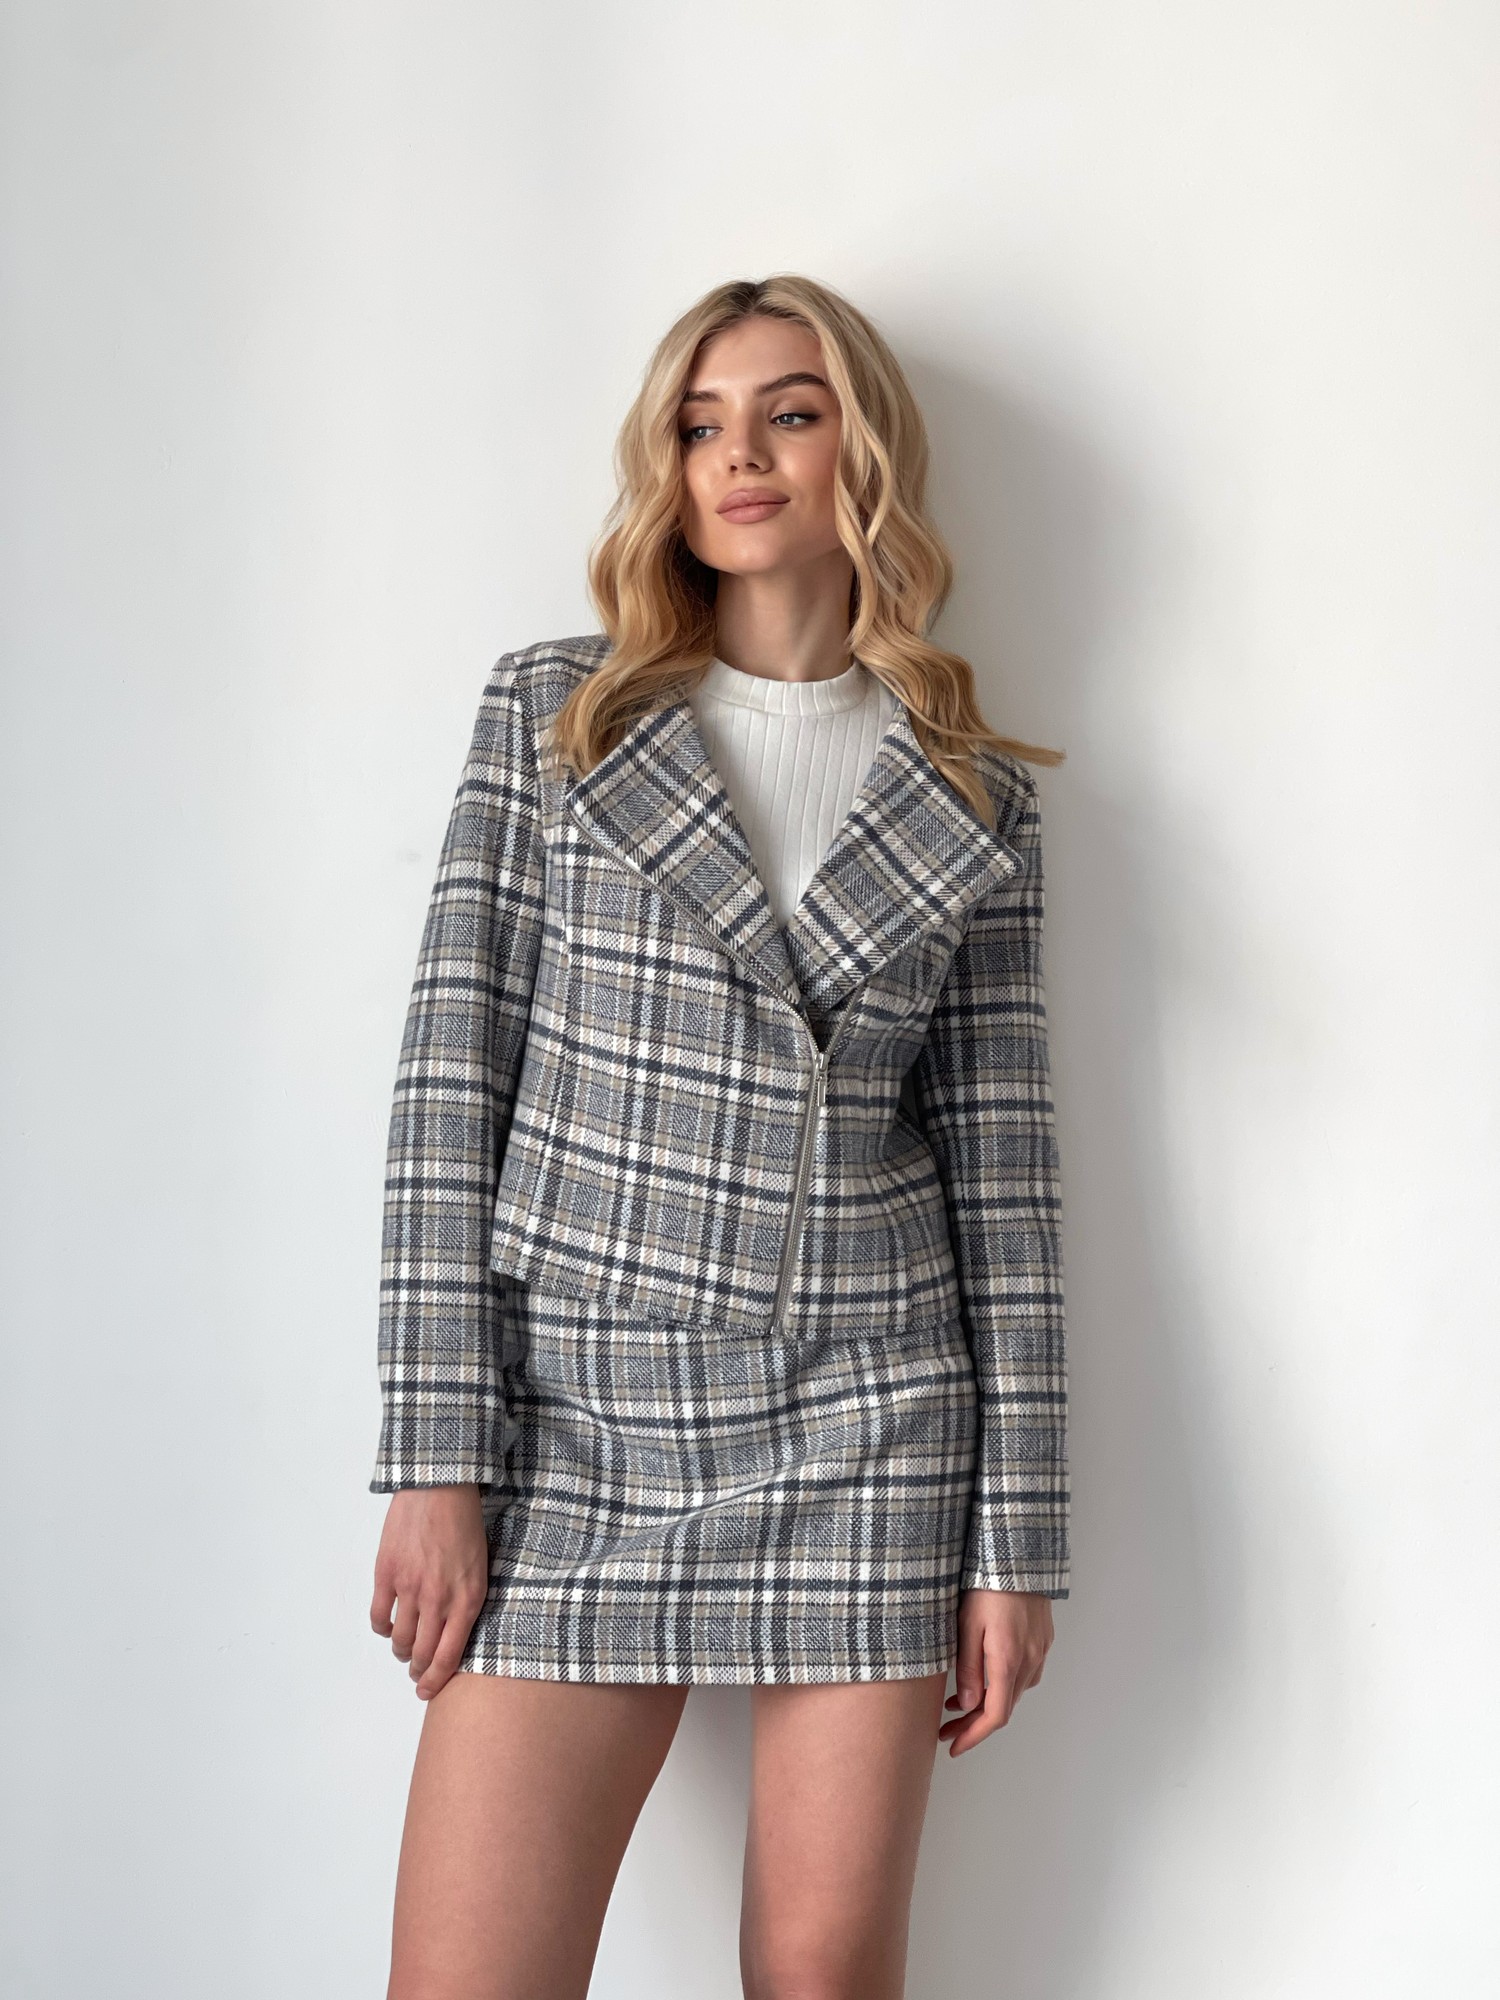 Checkered jacket with a zipper